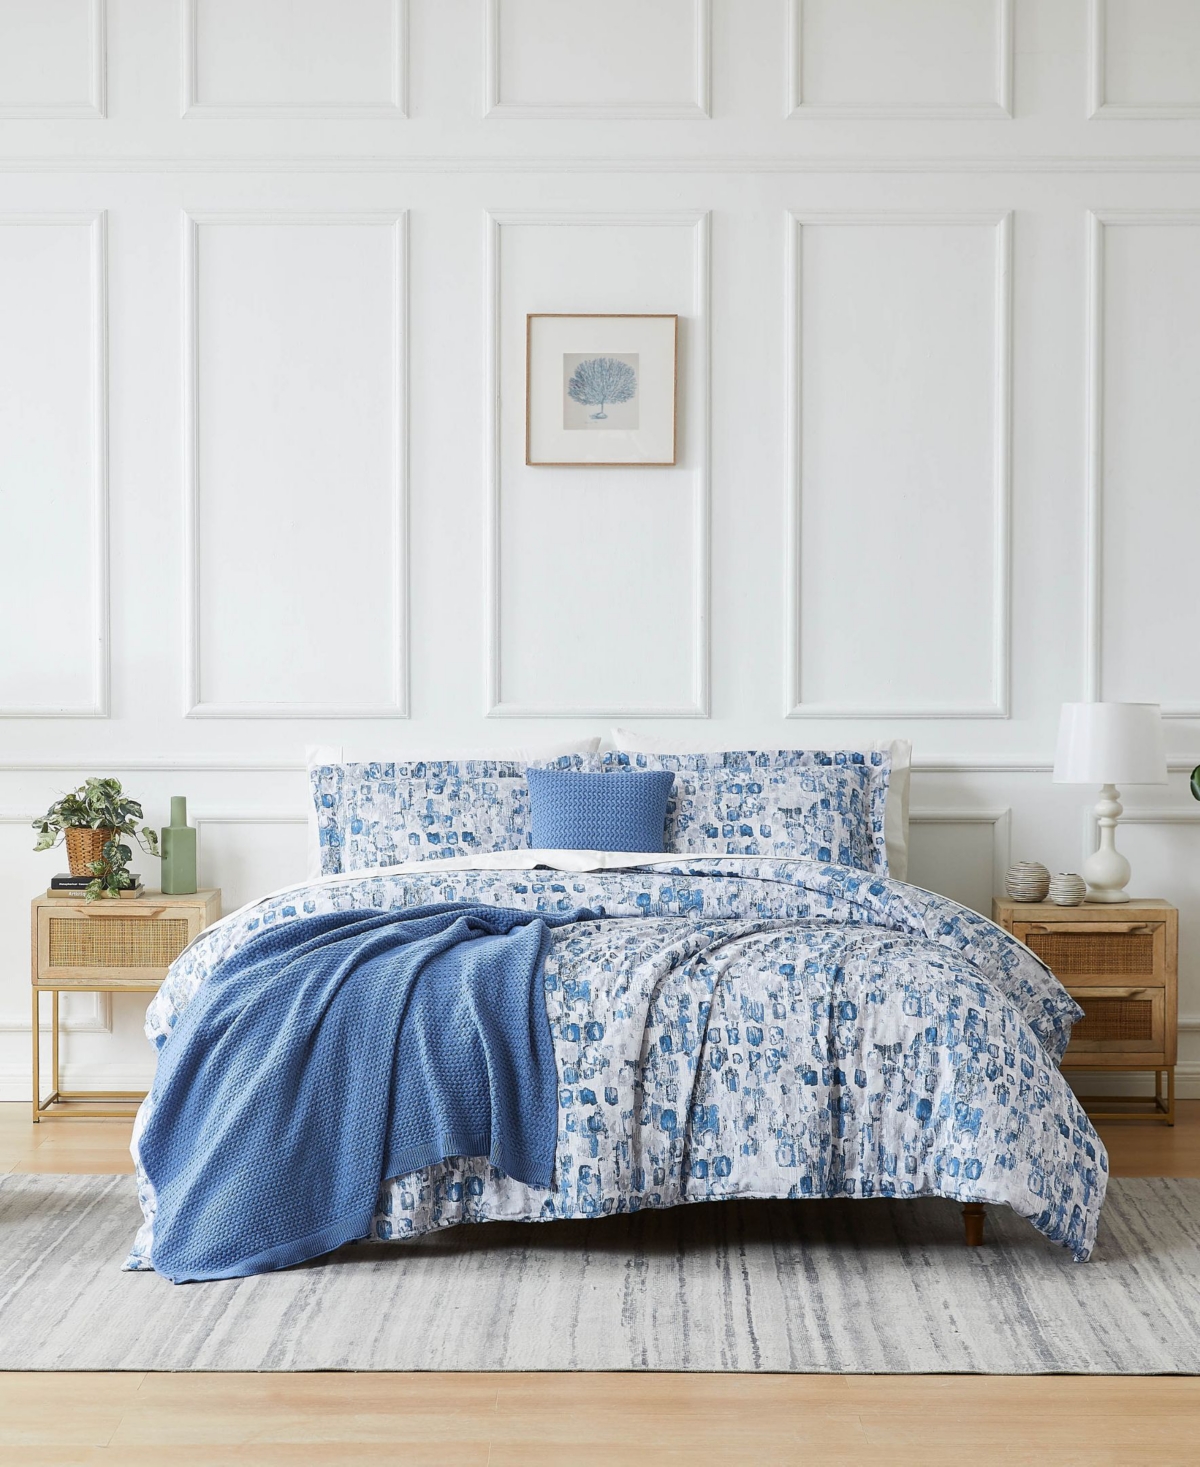 Southshore Fine Linens 5 Piece Rhythm Comforter And Sham Set, Full/queen In Blue